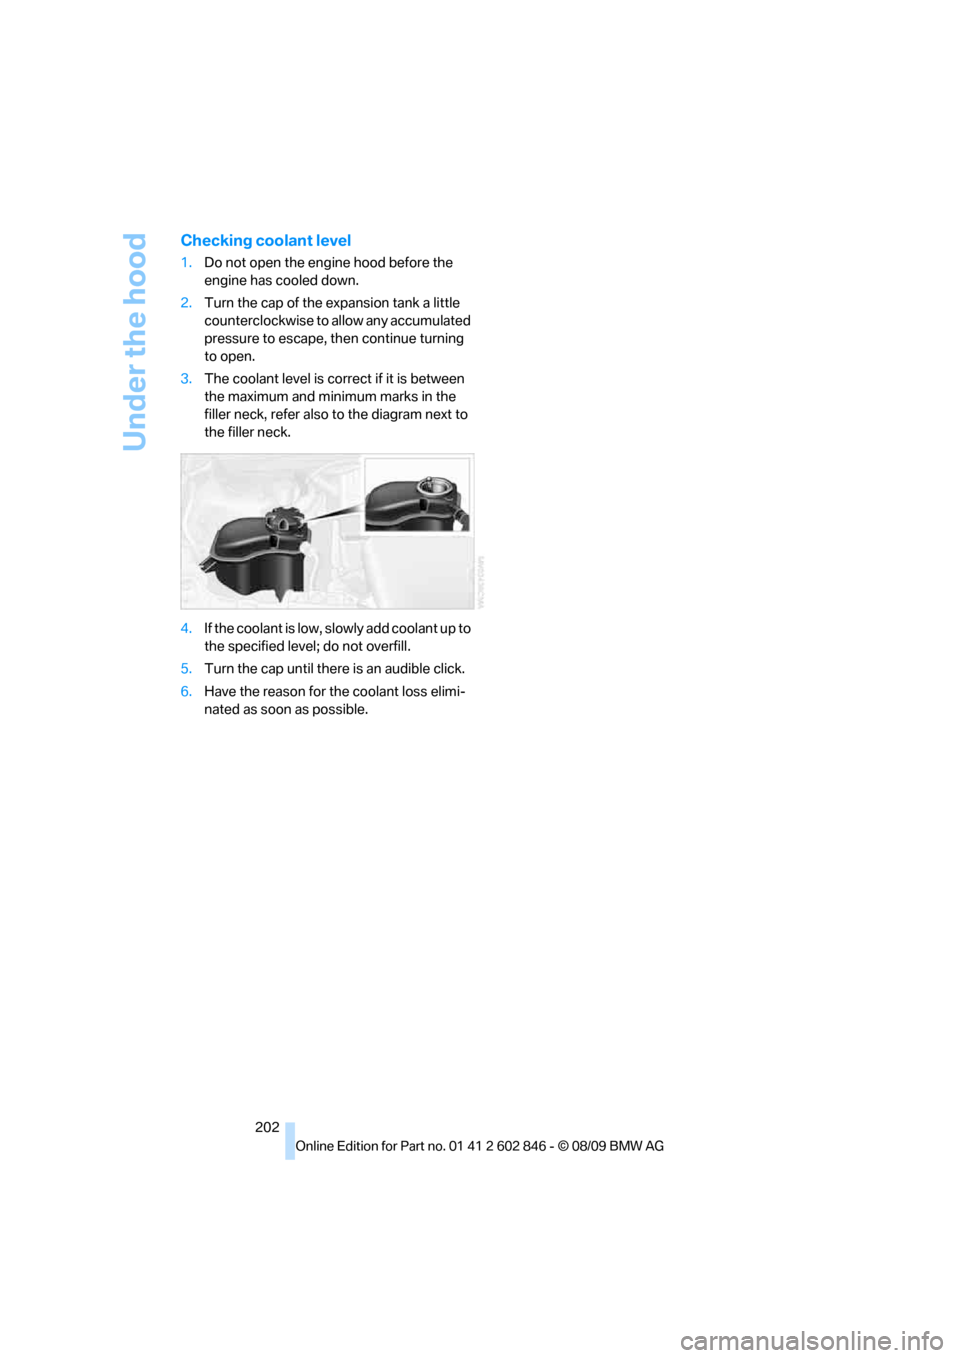 BMW 135I 2010 E81 Owners Manual Under the hood
202
Checking coolant level
1.Do not open the engine hood before the 
engine has cooled down.
2.Turn the cap of the expansion tank a little 
counterclockwise to allow any accumulated 
pr